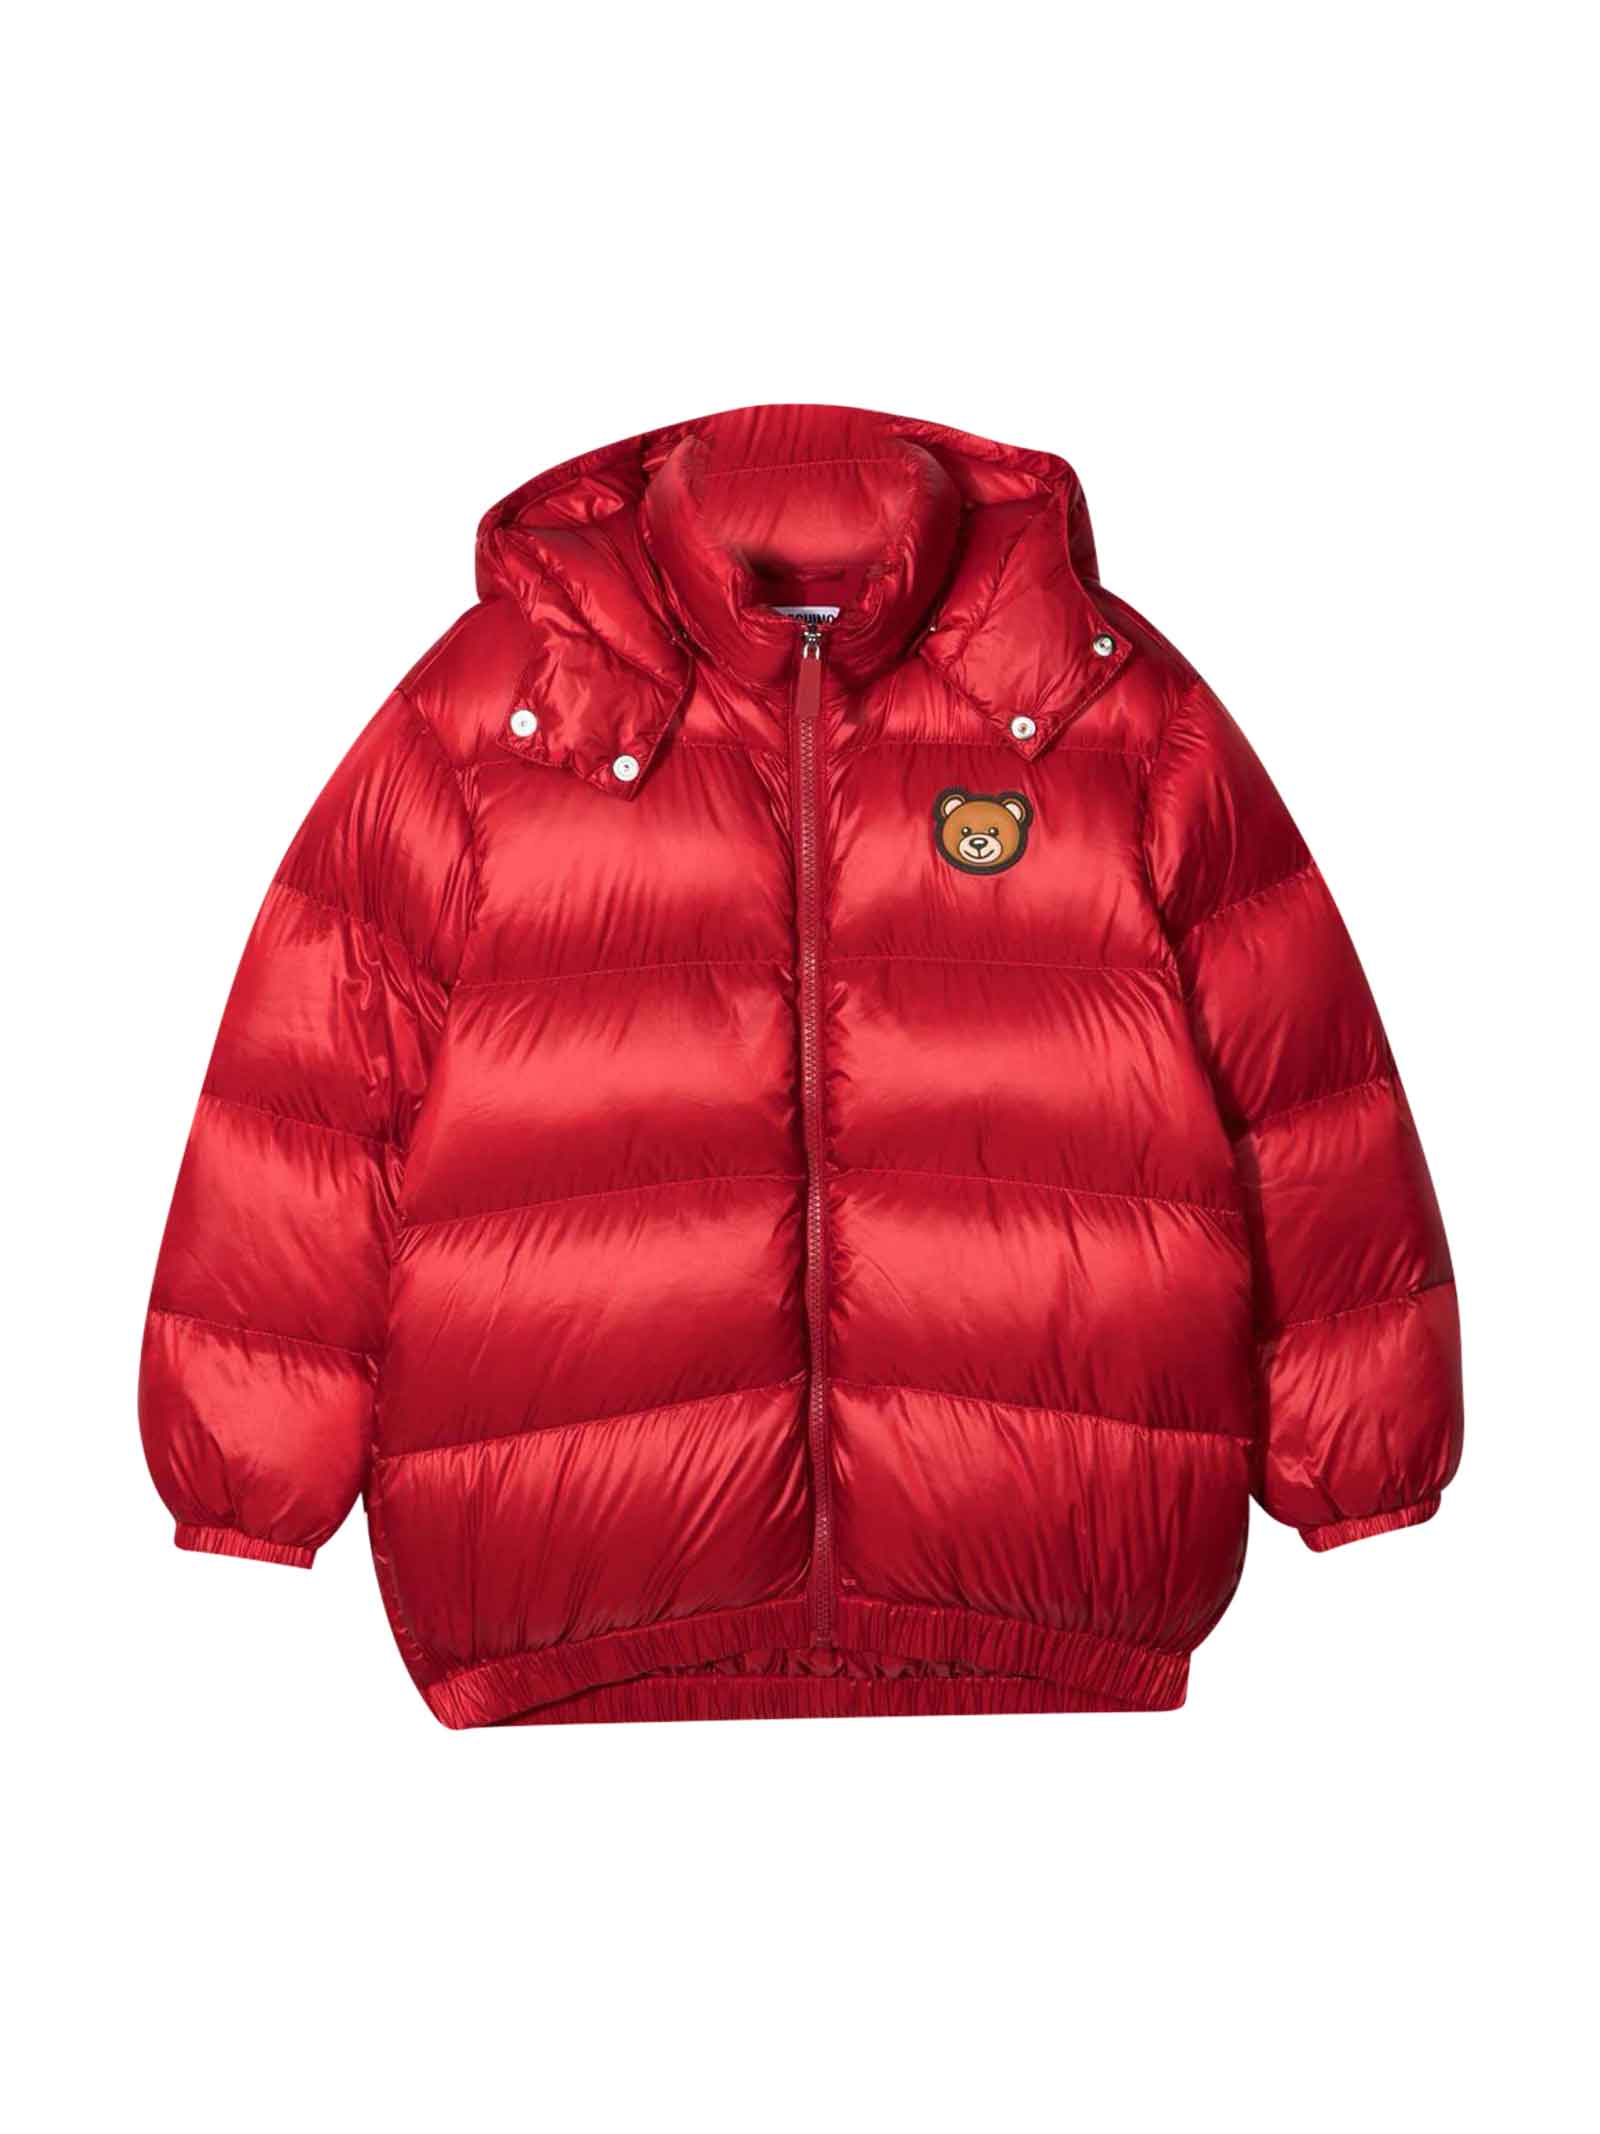 Moschino Red Jacket With Application And White Rear Logo